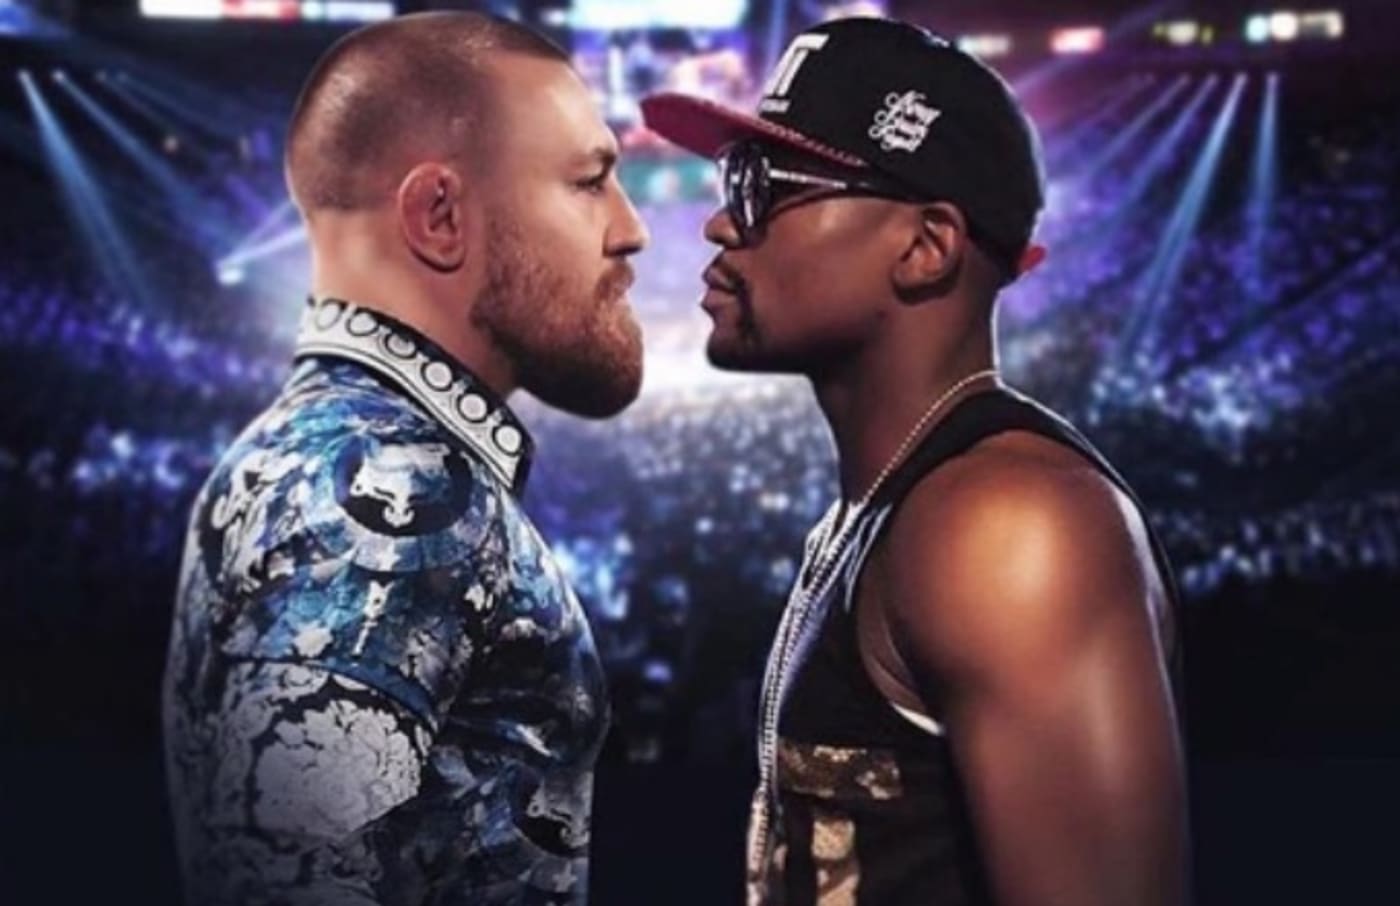 Conor McGregor and Floyd Mayweather fight poster.